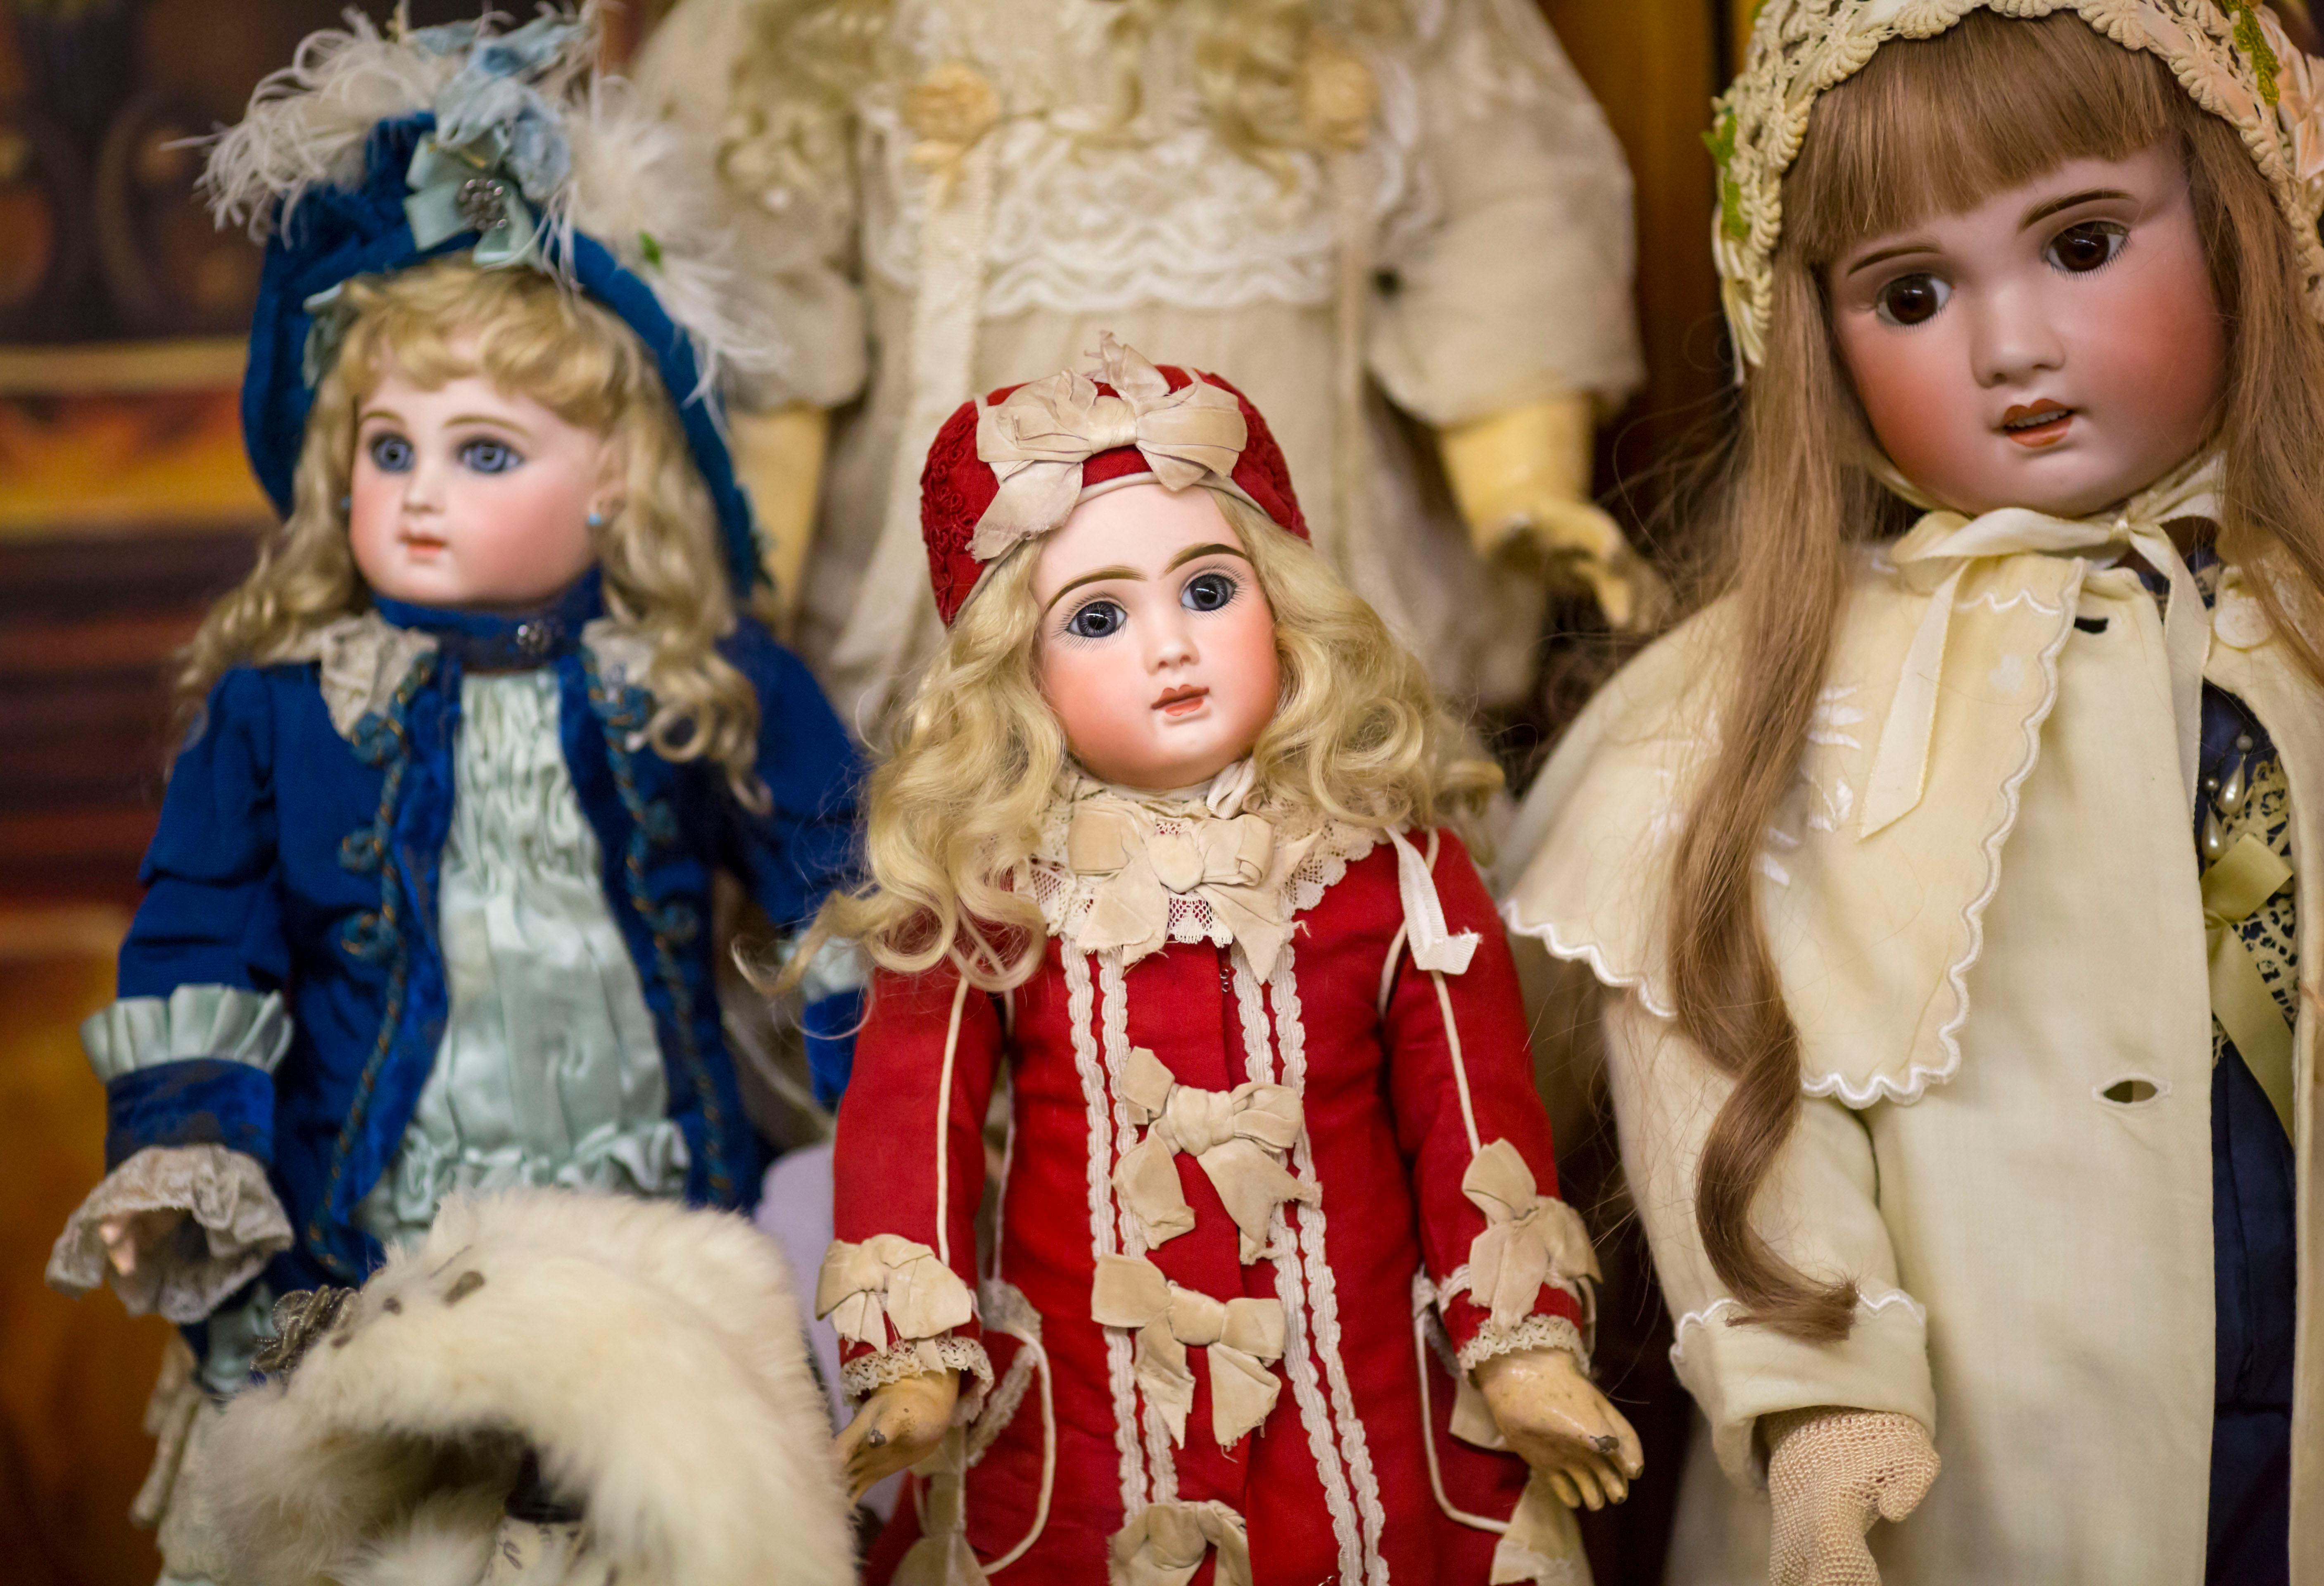 Photos The Doll & Teddy Bear Show is one of the oddest things we’ve